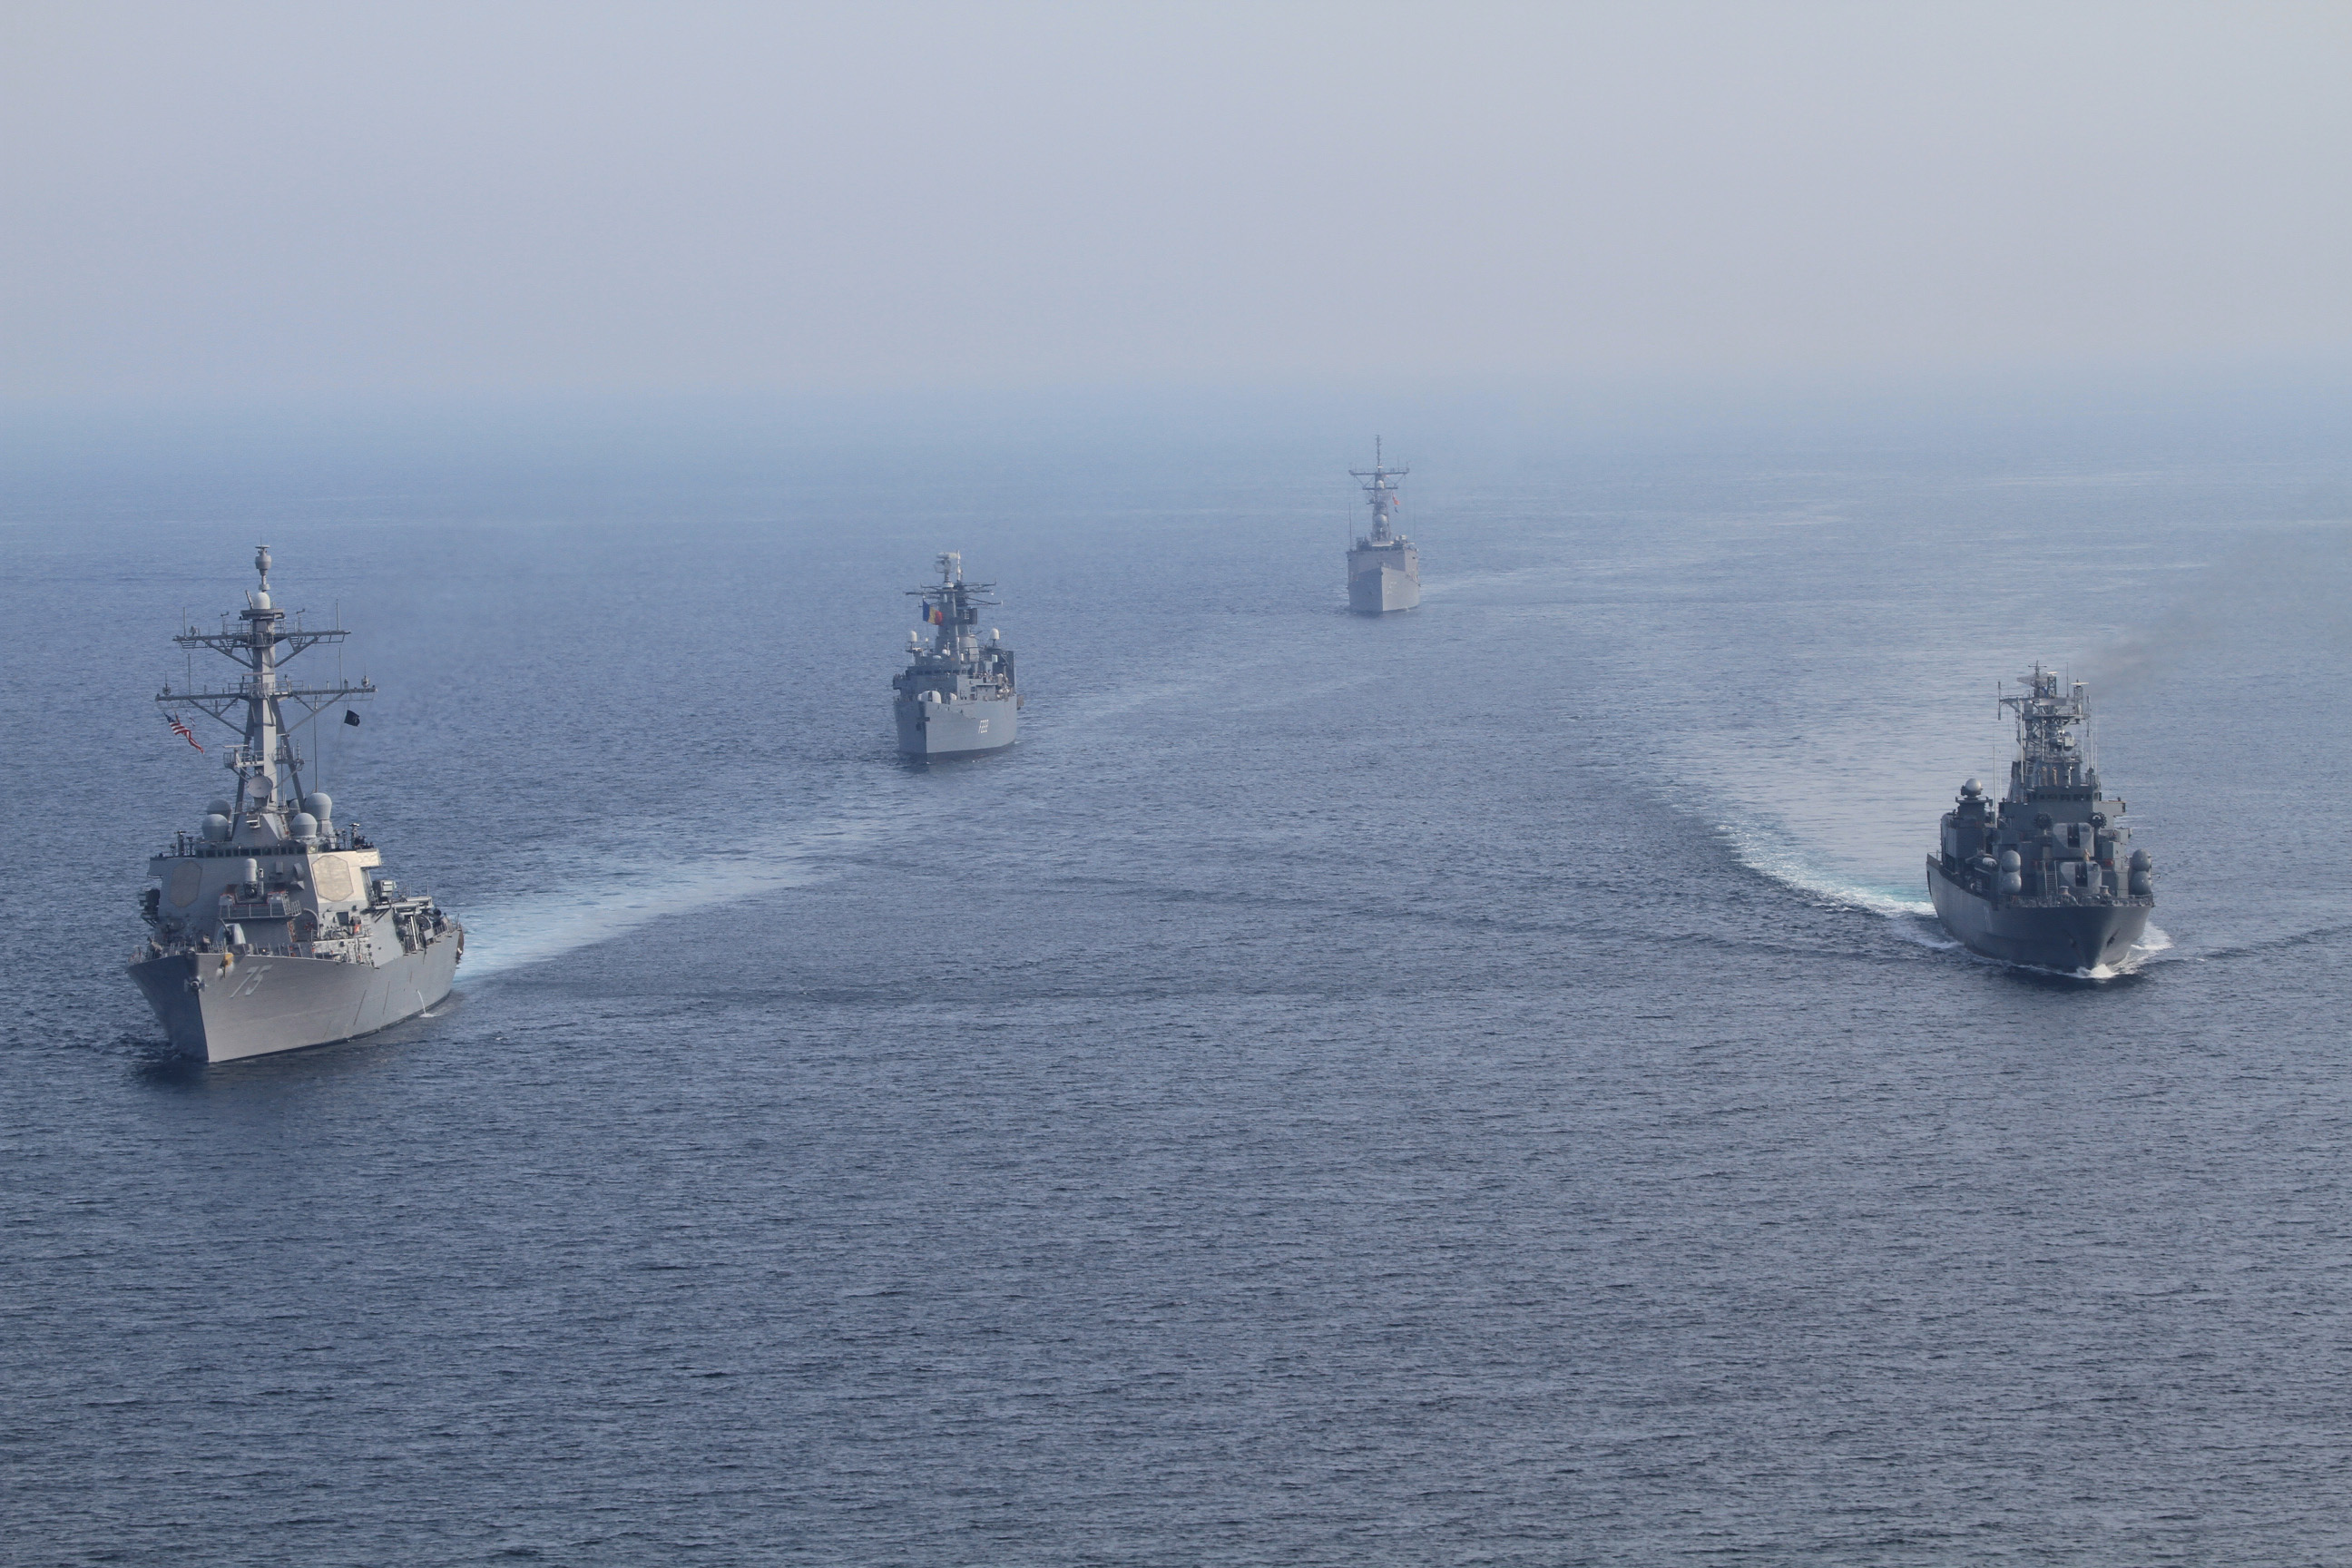 USS Donald Cook (DDG 75) and the guided-missile frigate USS Taylor (FFG 50) participate in a bilateral underway engagement with Romanian ships, the frigate ROS Regina Maria (F 222) and the frigate ROS Marasesti (F 111) in the Black Sea in April 2014. US Navy Photo